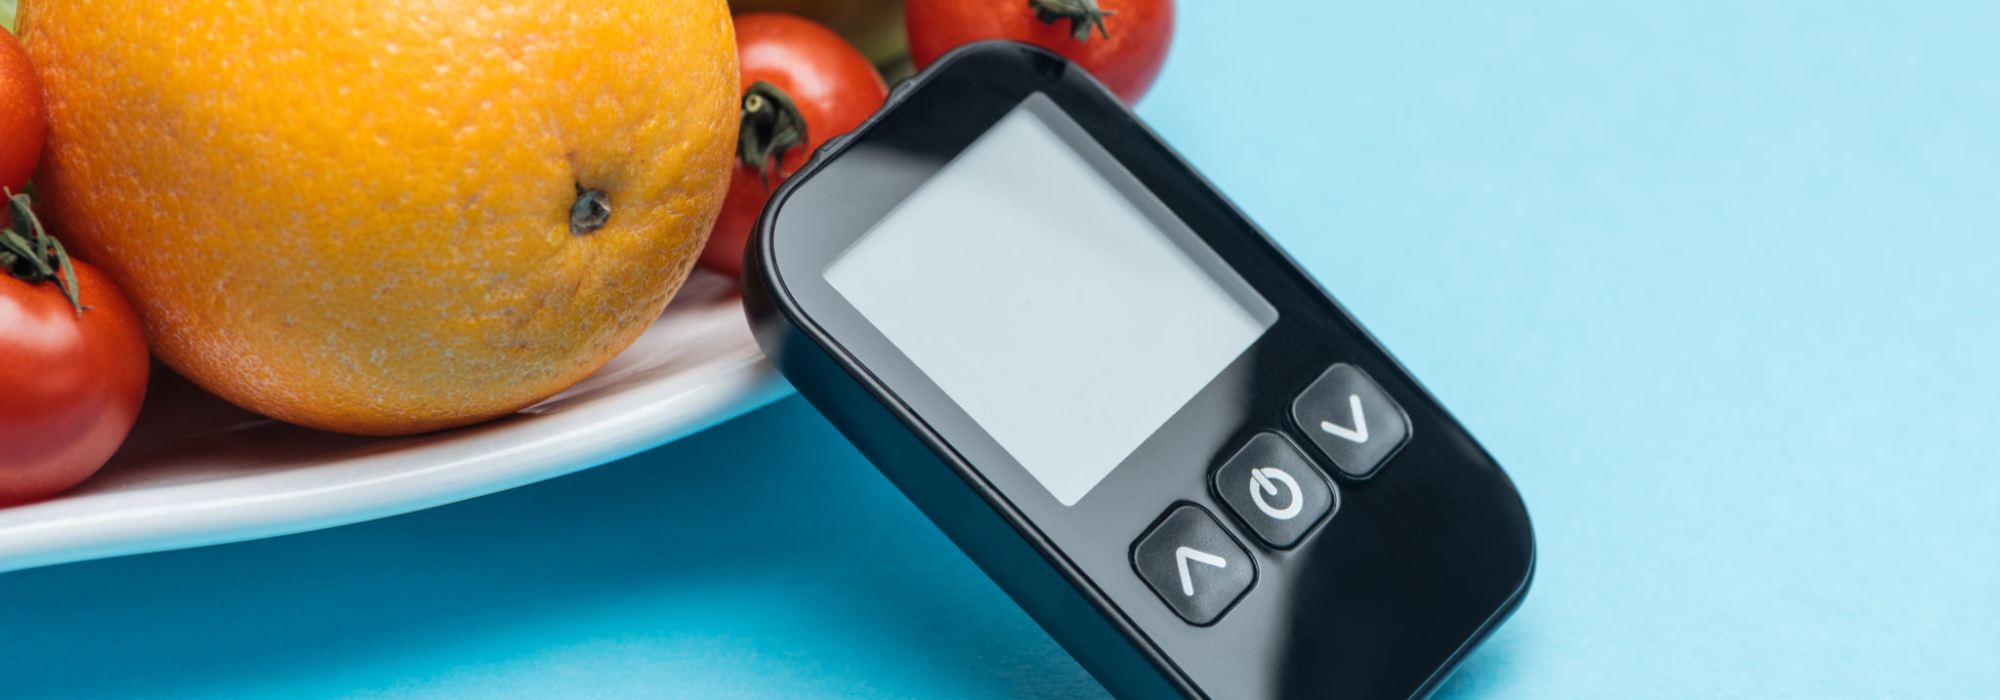 Glucometer with fruits